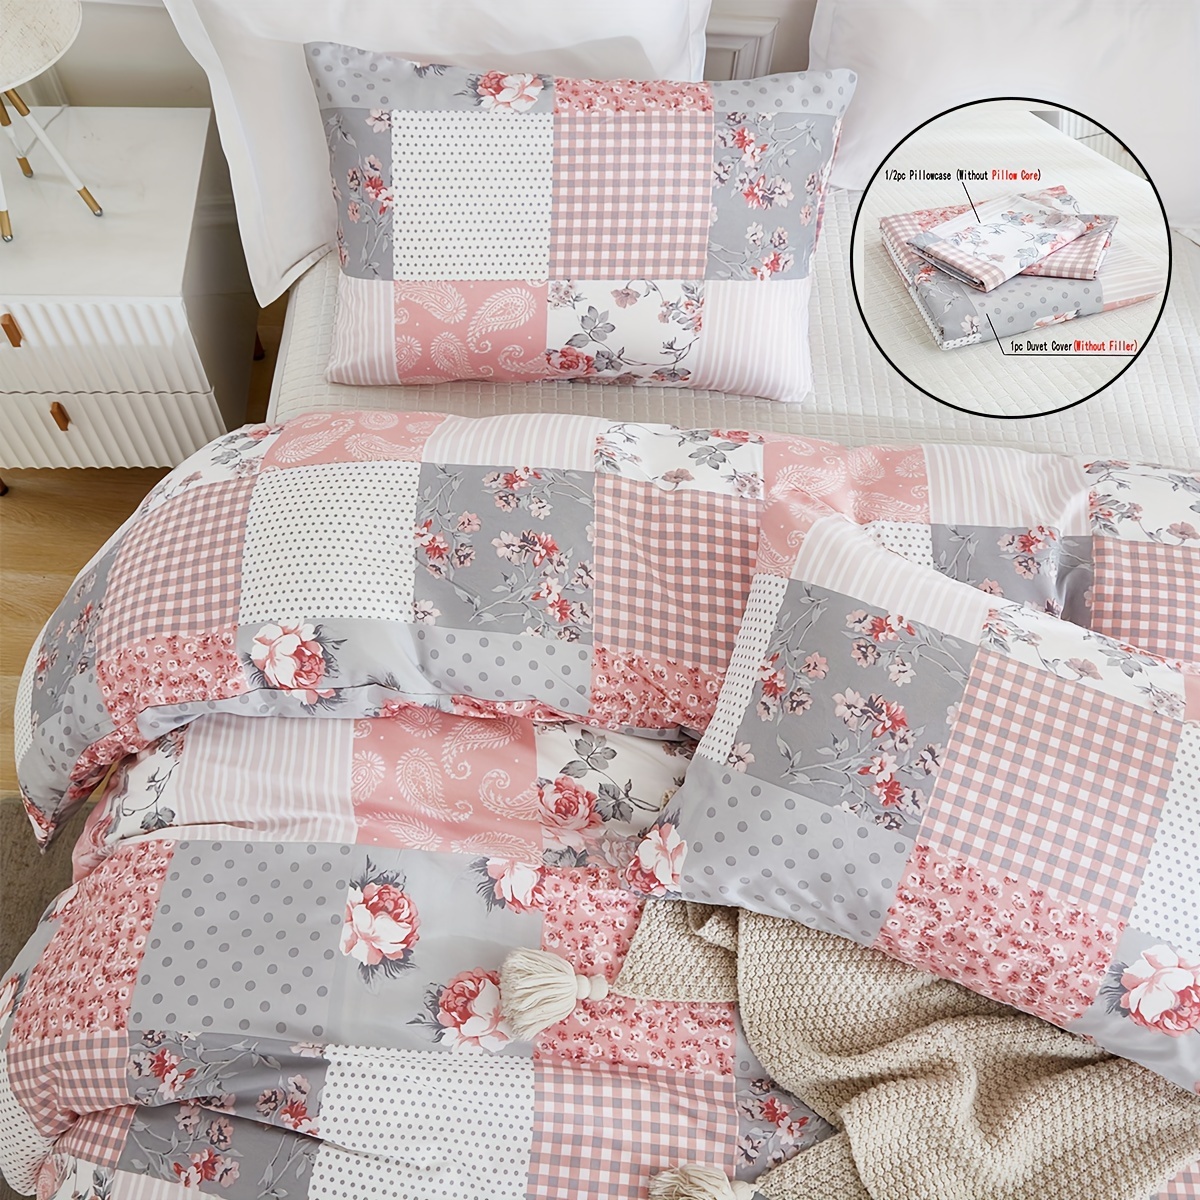 

3pcs Polyester Flower Checkered Printed Duvet Cover Set, Soft And Breathable Bedding For Bedroom Decor, 1 Duvet Cover And 2 Pillowcases Without Core, American Countryside Fresh Style